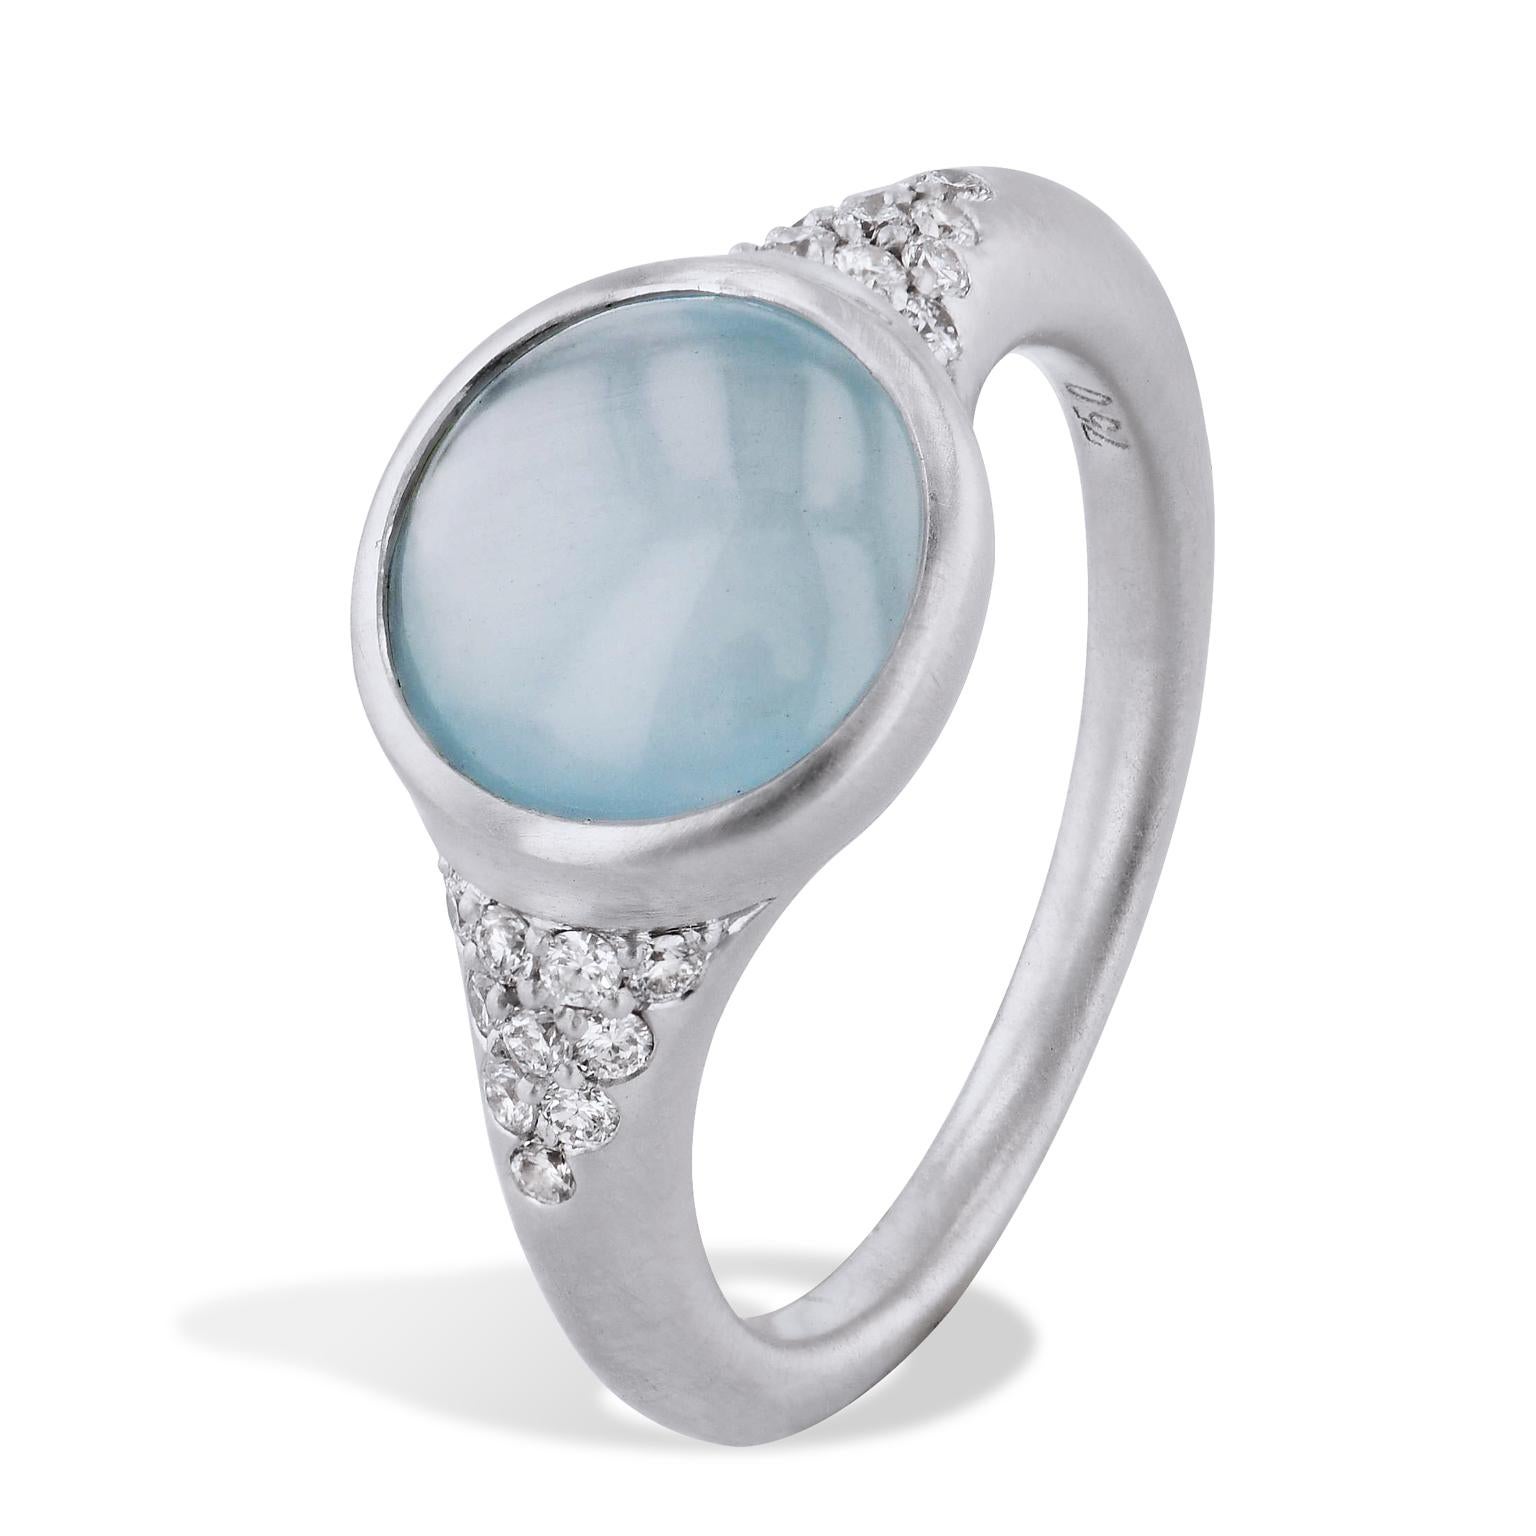 Aquamarine and Diamond White Gold Ring

Always have the color of the sea at your fingers with this 2.72 carat cabochon cut aquamarine stone, centered in an 18 karat white gold band holding pave set diamonds (size 6.5).